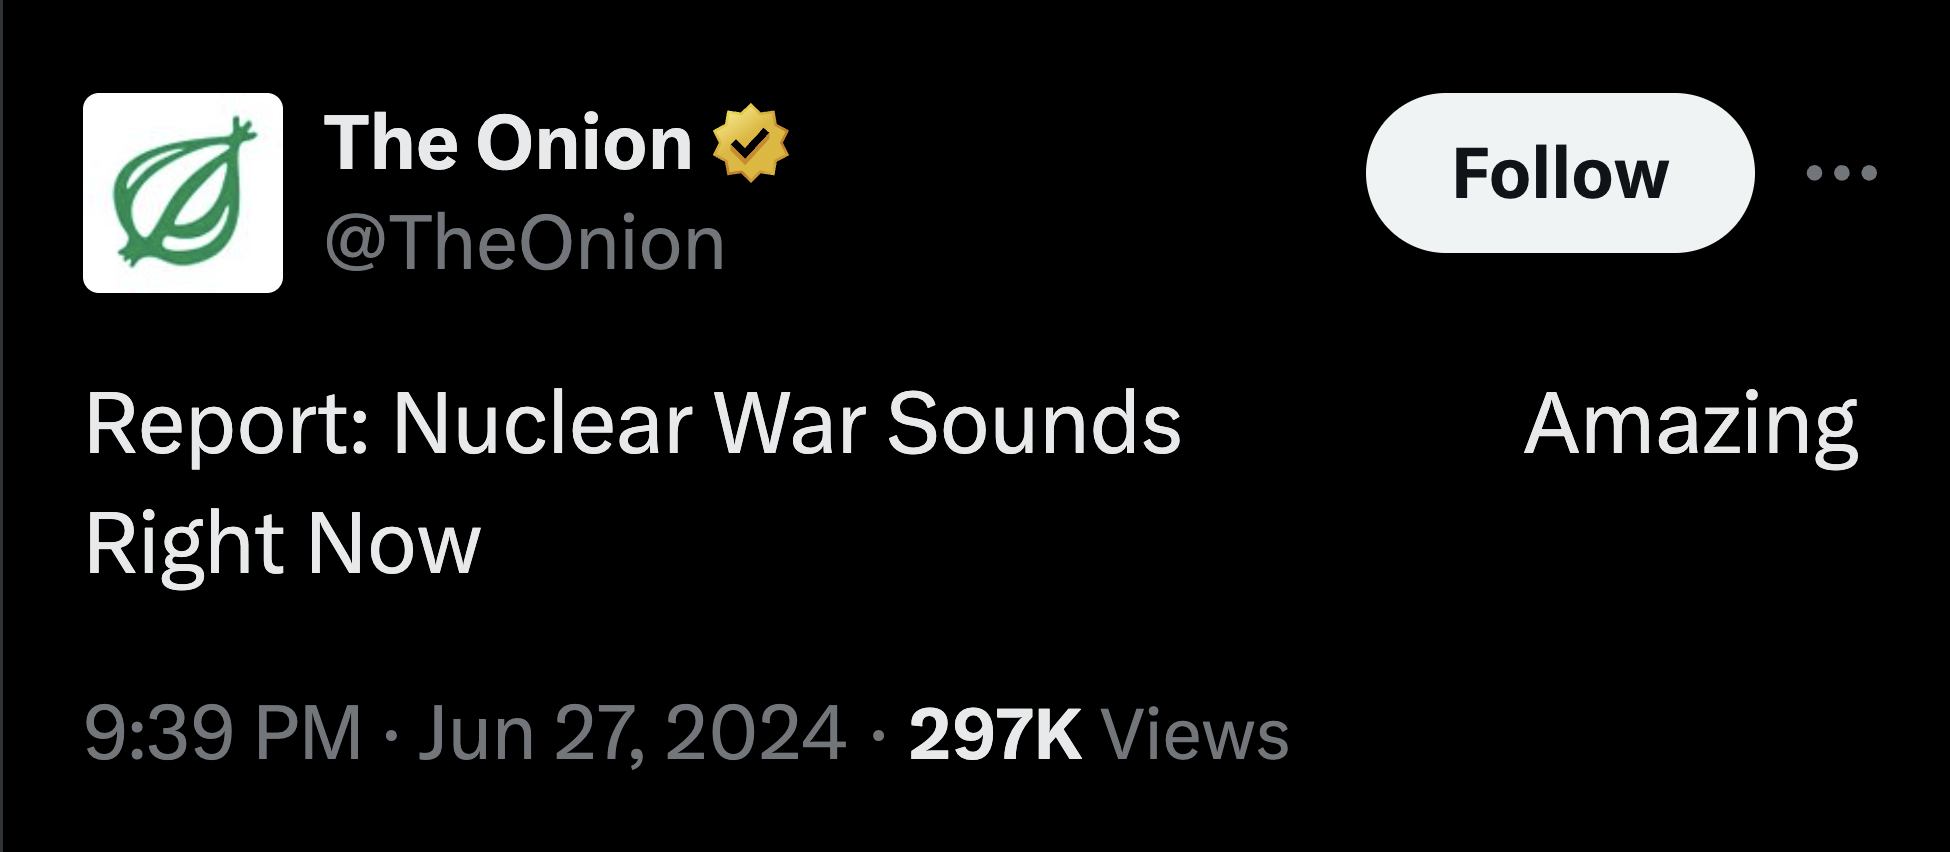 screenshot - The Onion Report Nuclear War Sounds Right Now Views Amazing